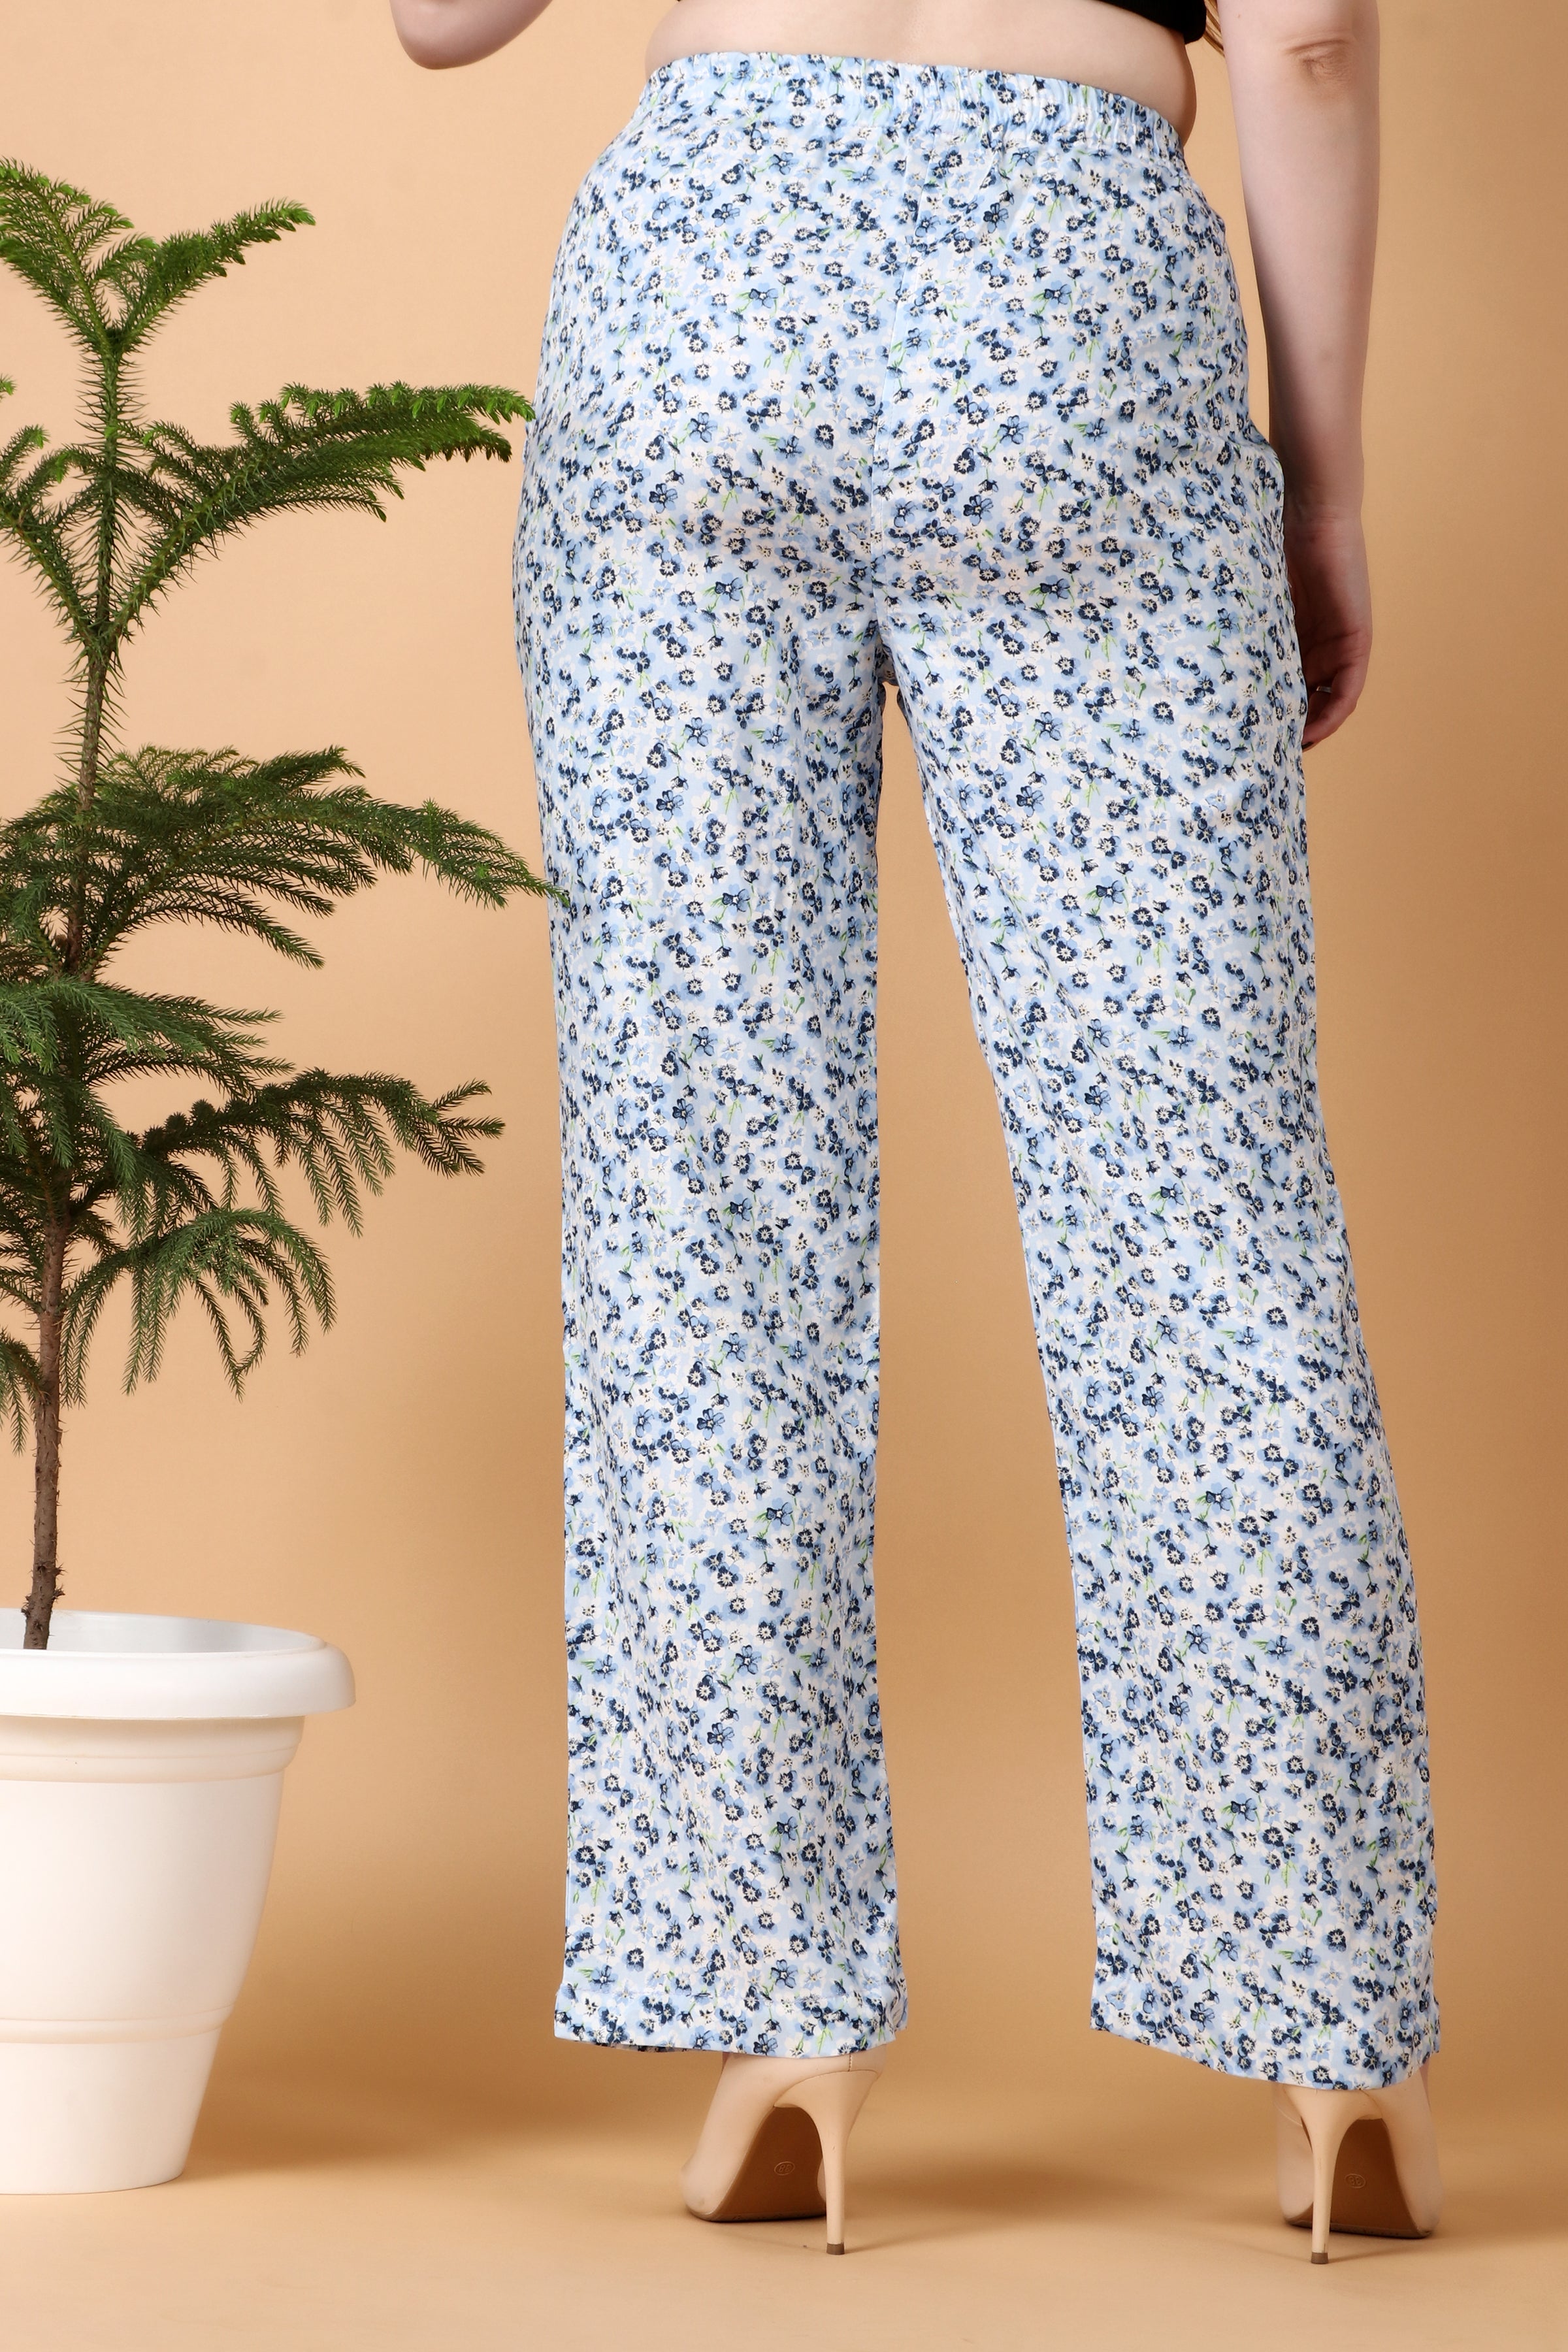 Styling Statement Pants  Floral WideLeg Silk Pants  Color  Chic